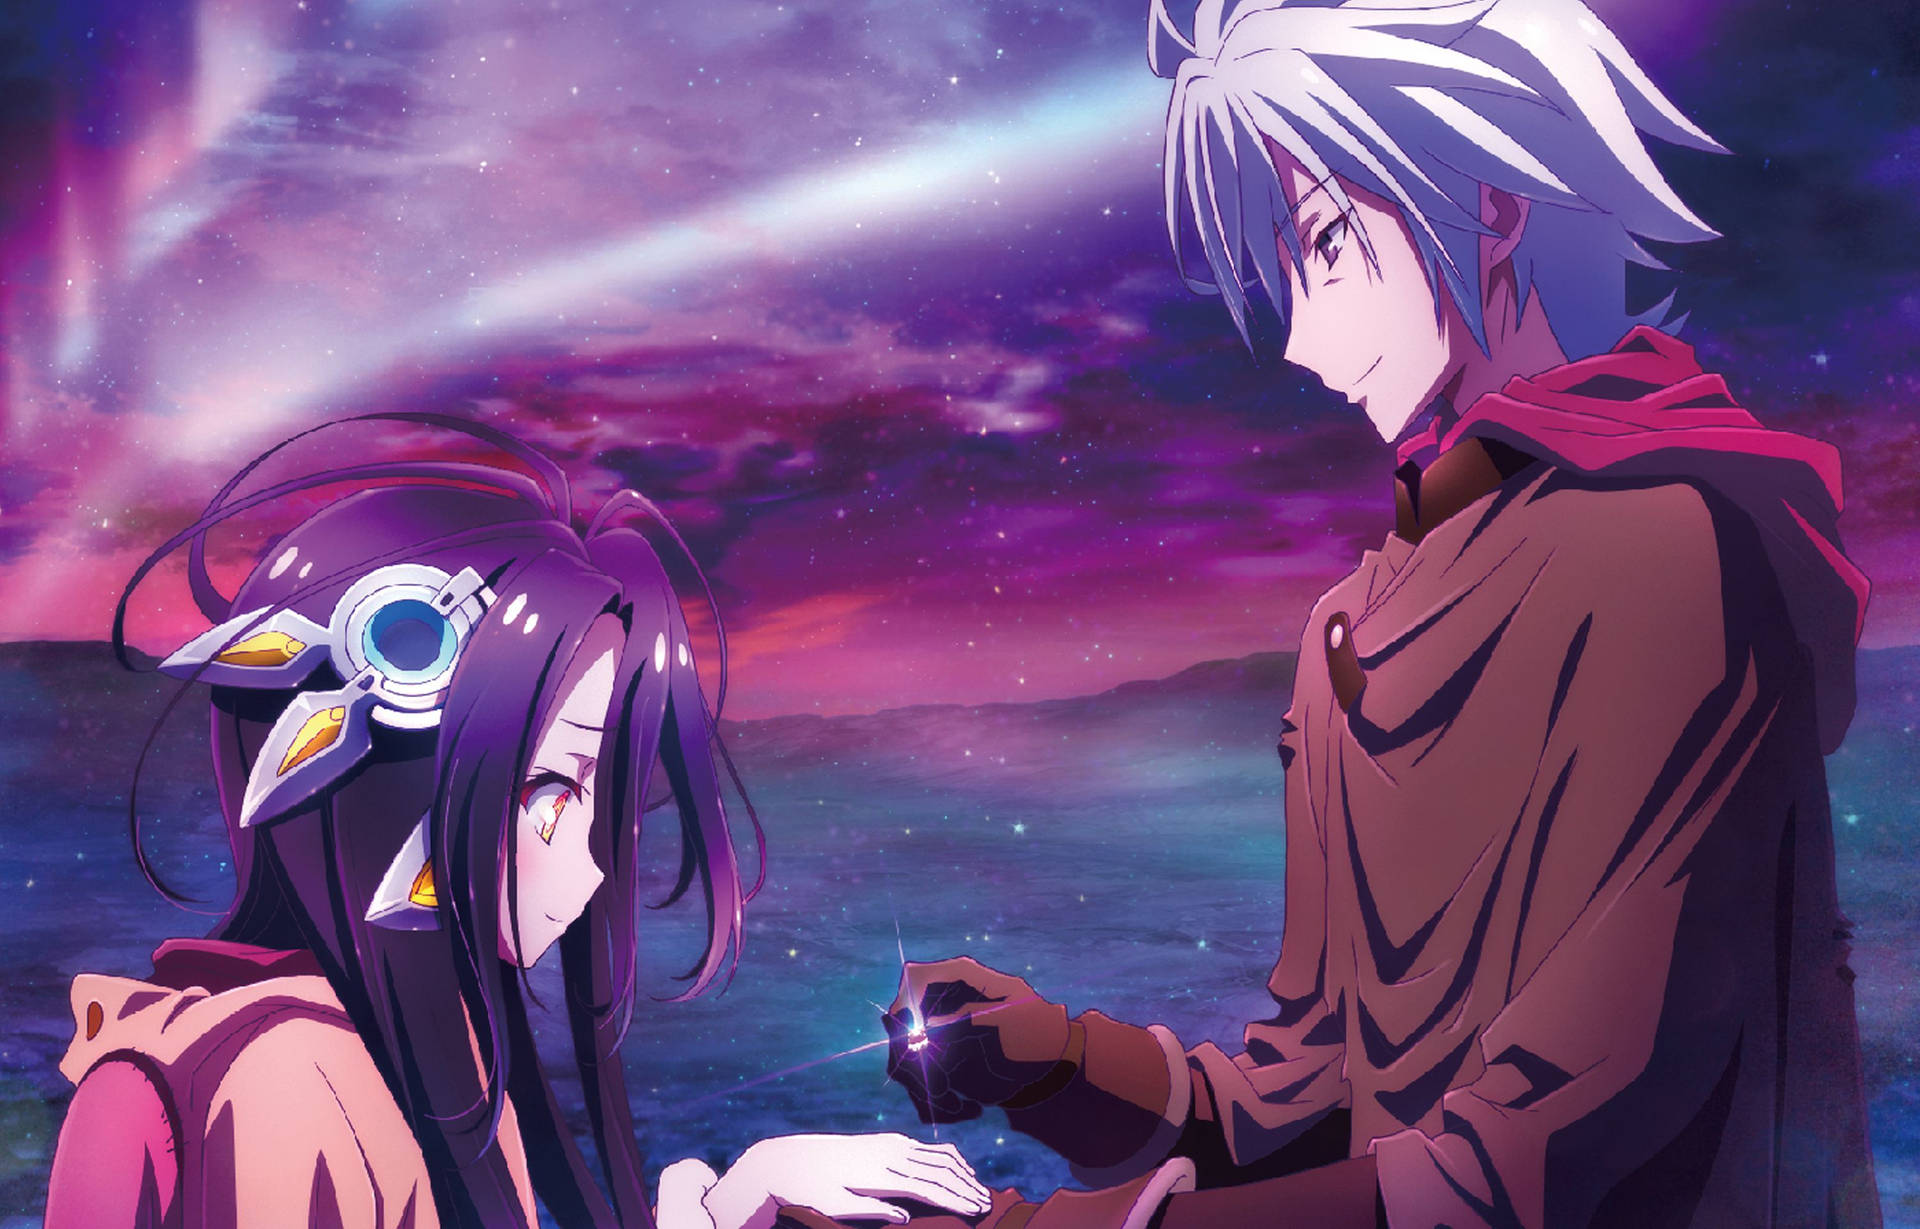 Join Sora and Shiro as they embark on escapist adventures in the world of No Game No Life. Wallpaper